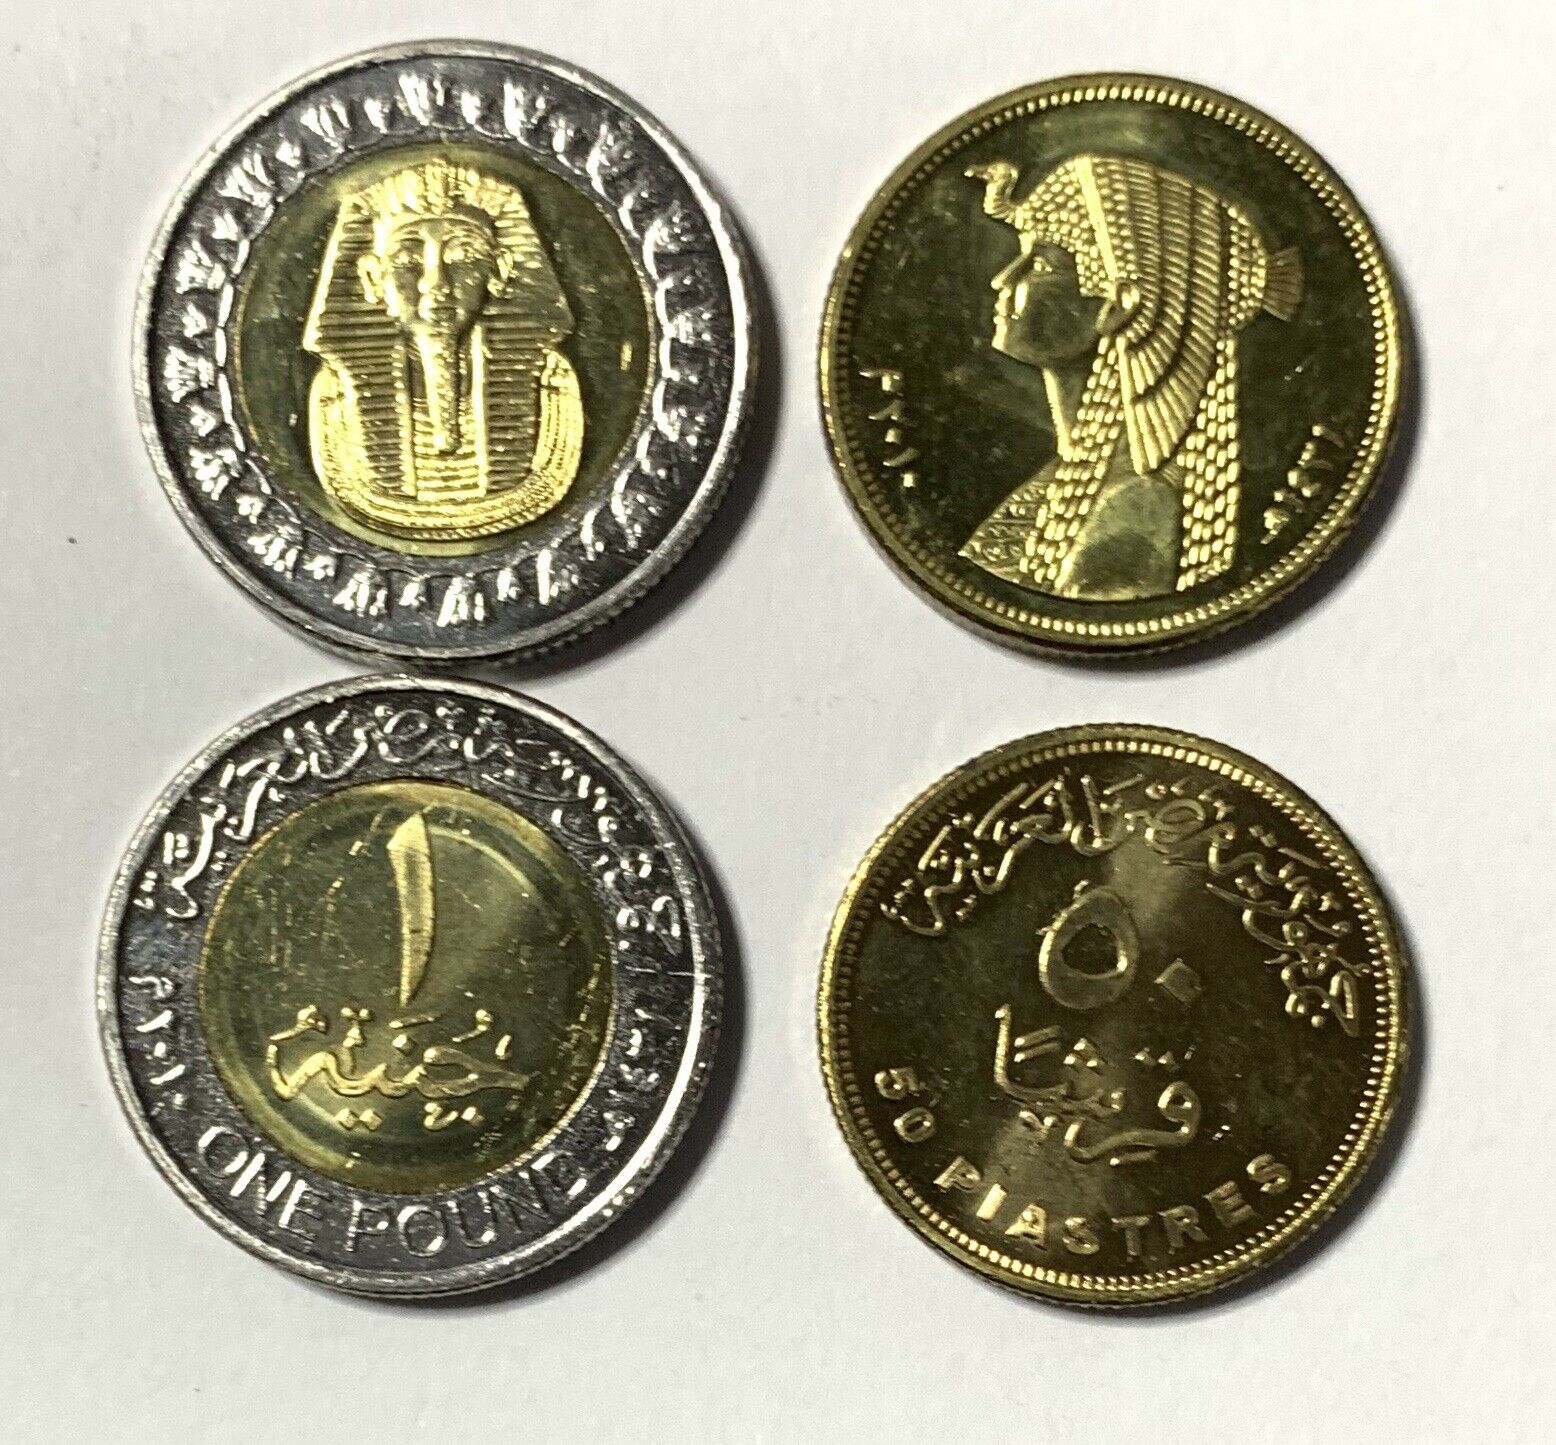 Egypt 2010 King Tut & Cleopatra Uncirculated 2 Coins